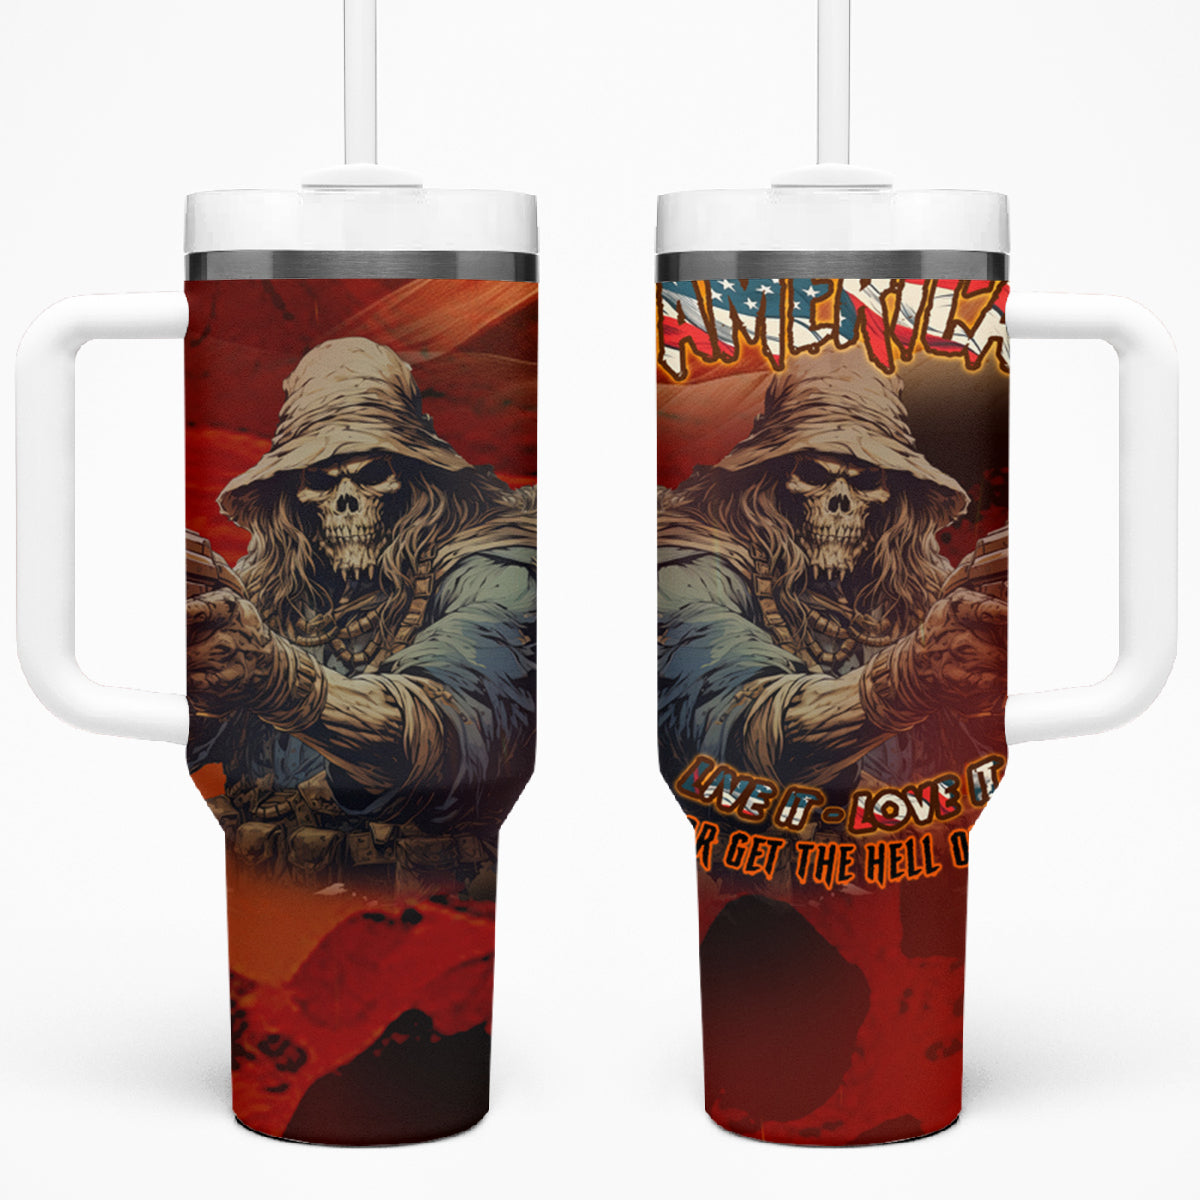 America Live It - Love It Or Get The Hell Out Tumbler With Handle